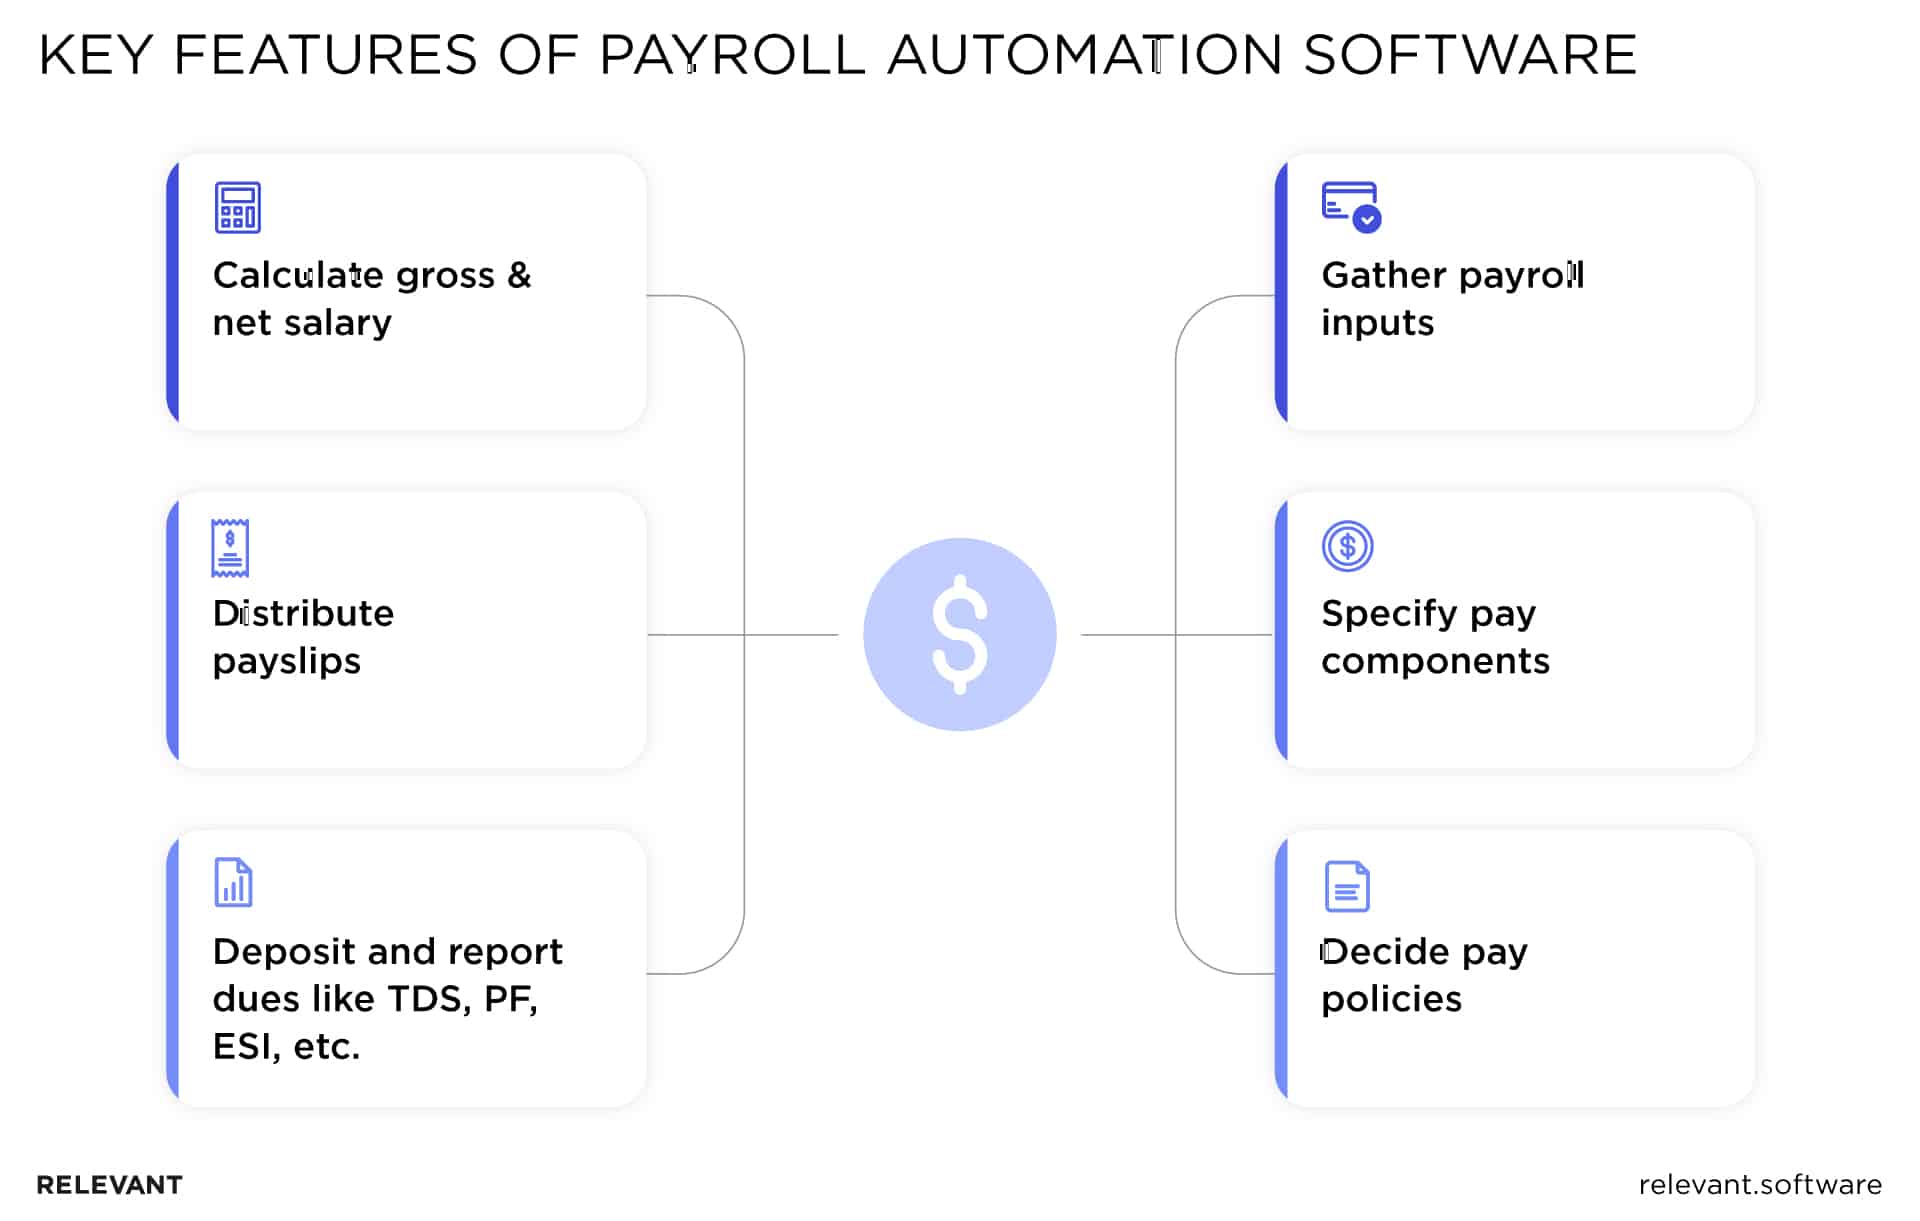 Key features of payroll automation software